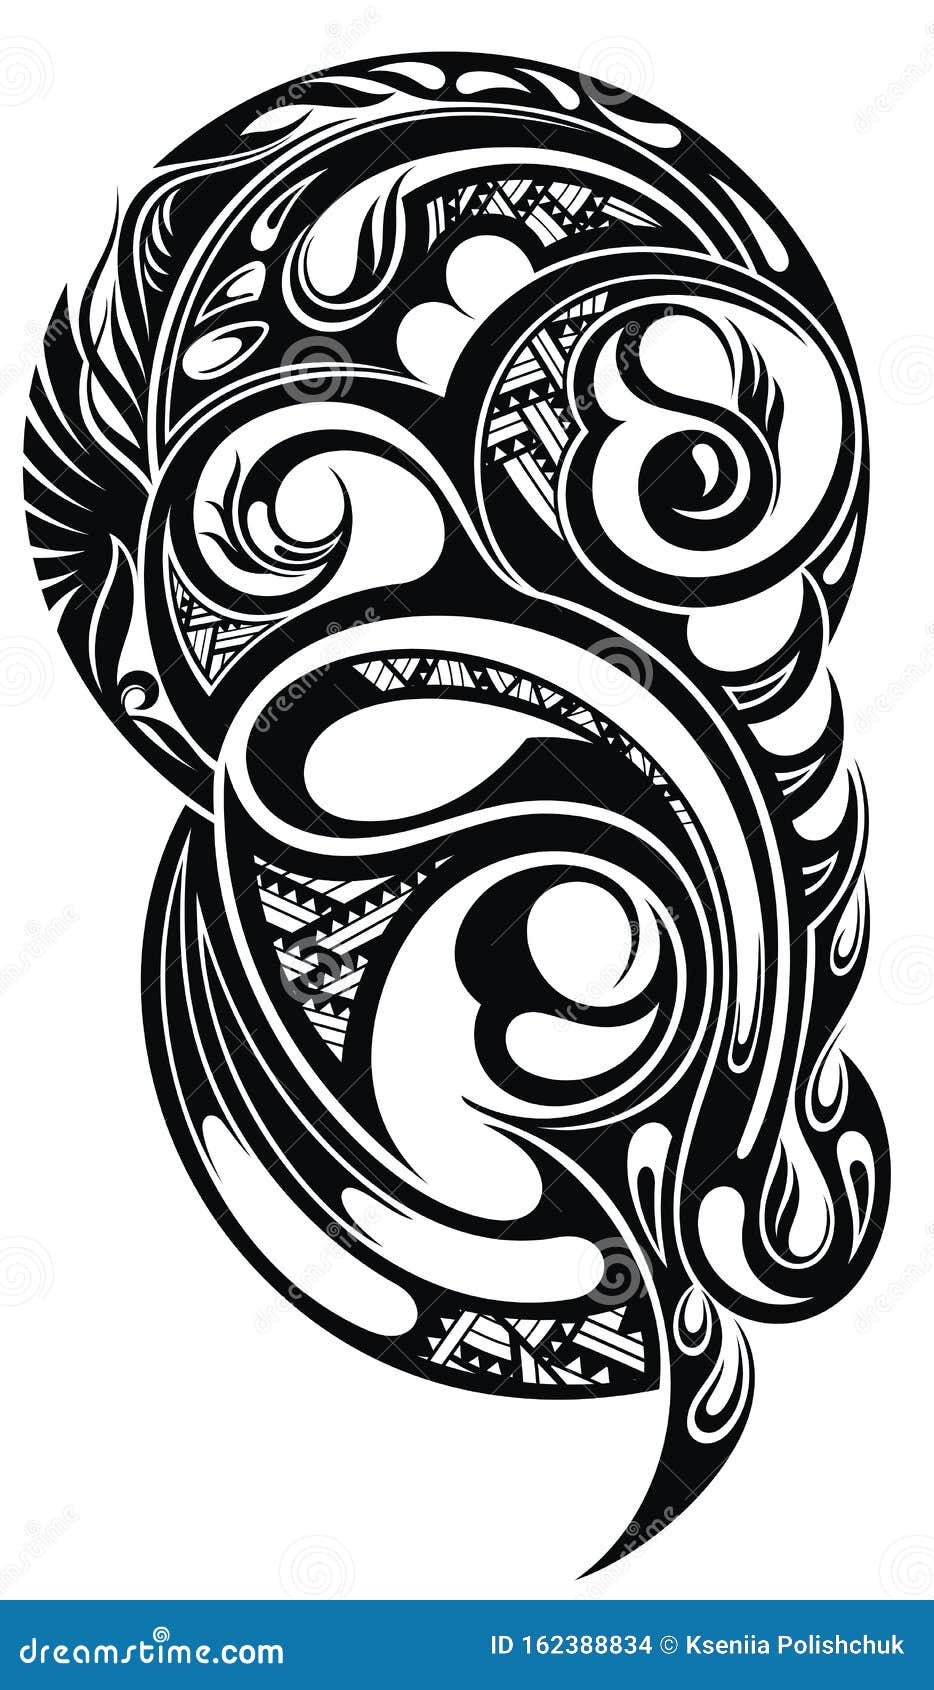 Custom Tribal Tattoo Design Or Motif Stock Photo  Download Image Now   Abstract Art Art And Craft  iStock